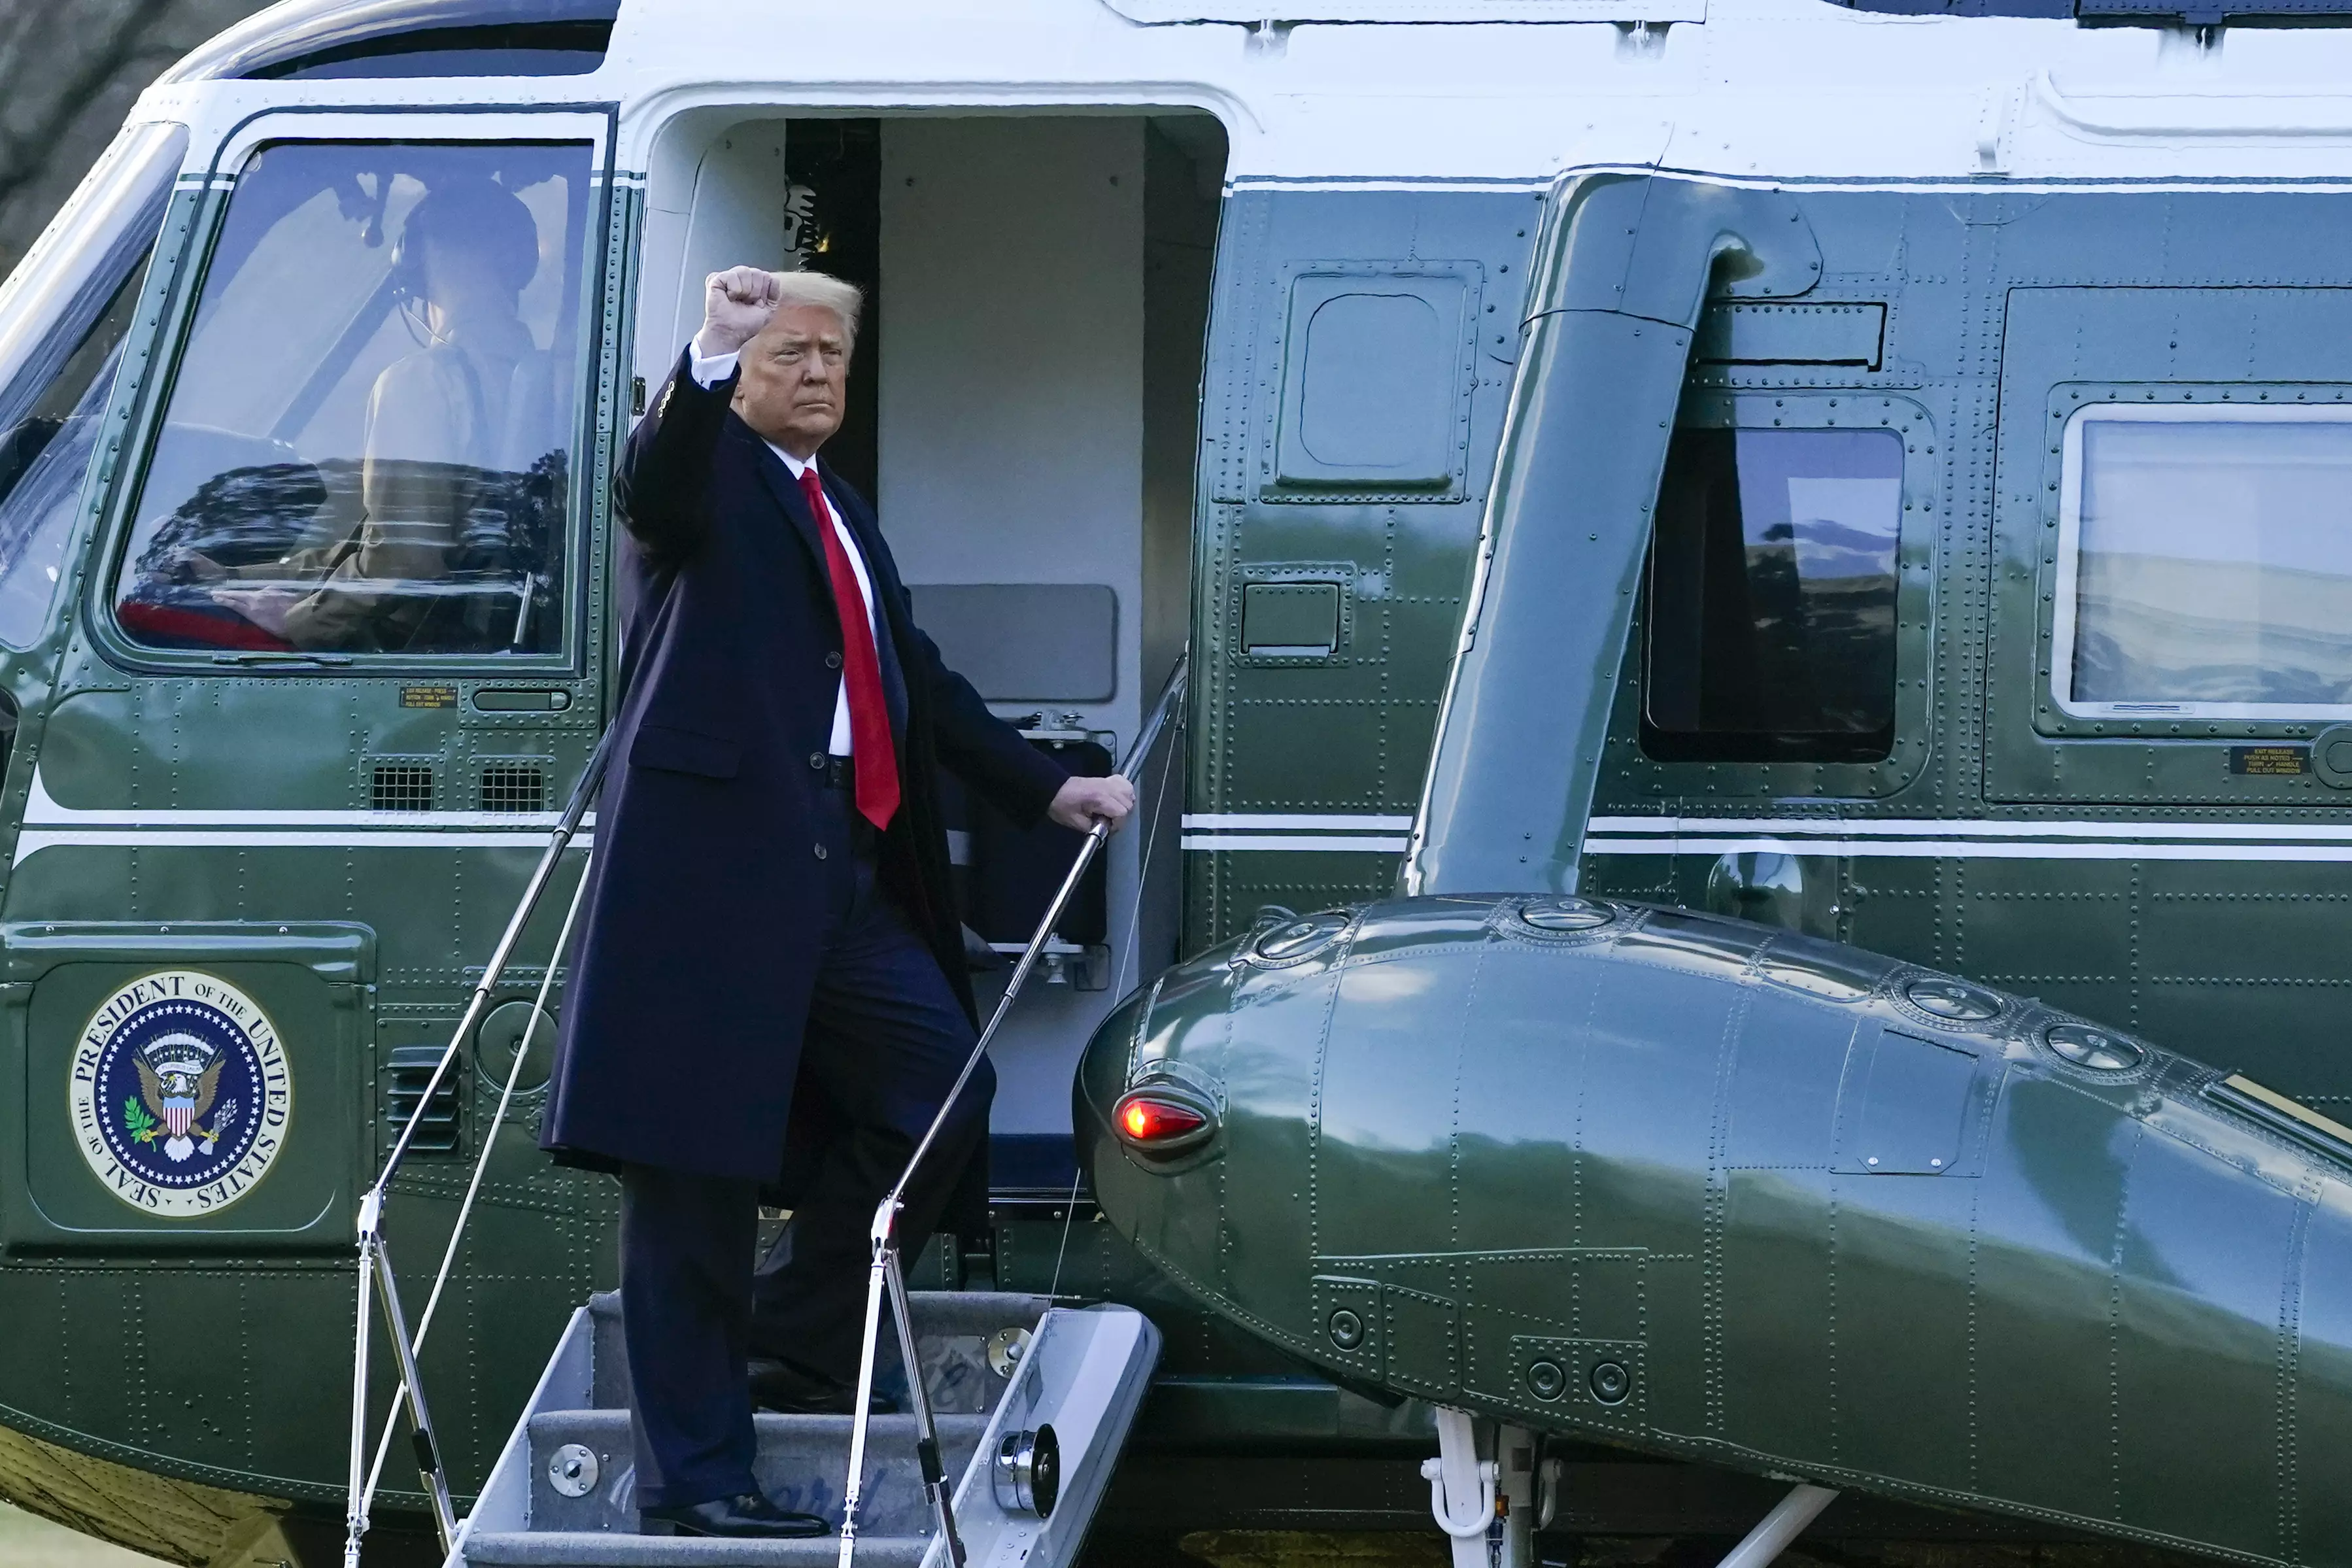 rump gestures as he boards Marine One on the South Lawn of the White House on January 20, 2021.